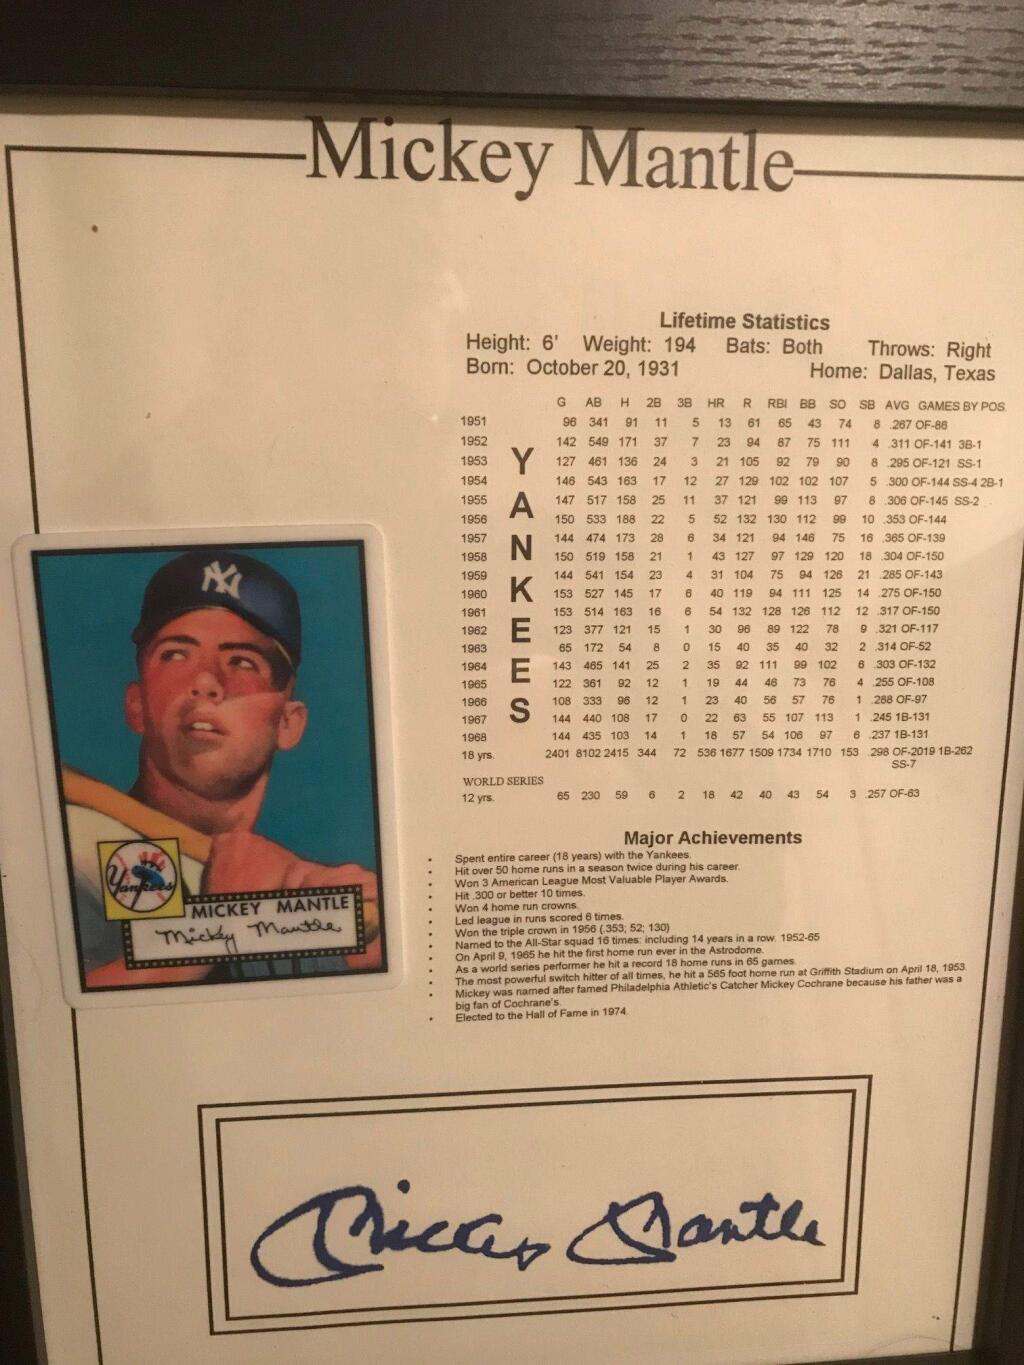 Among the special items to be auctioned off to aid fire relief is an autographed Mickey Mantle career statistics sheet.